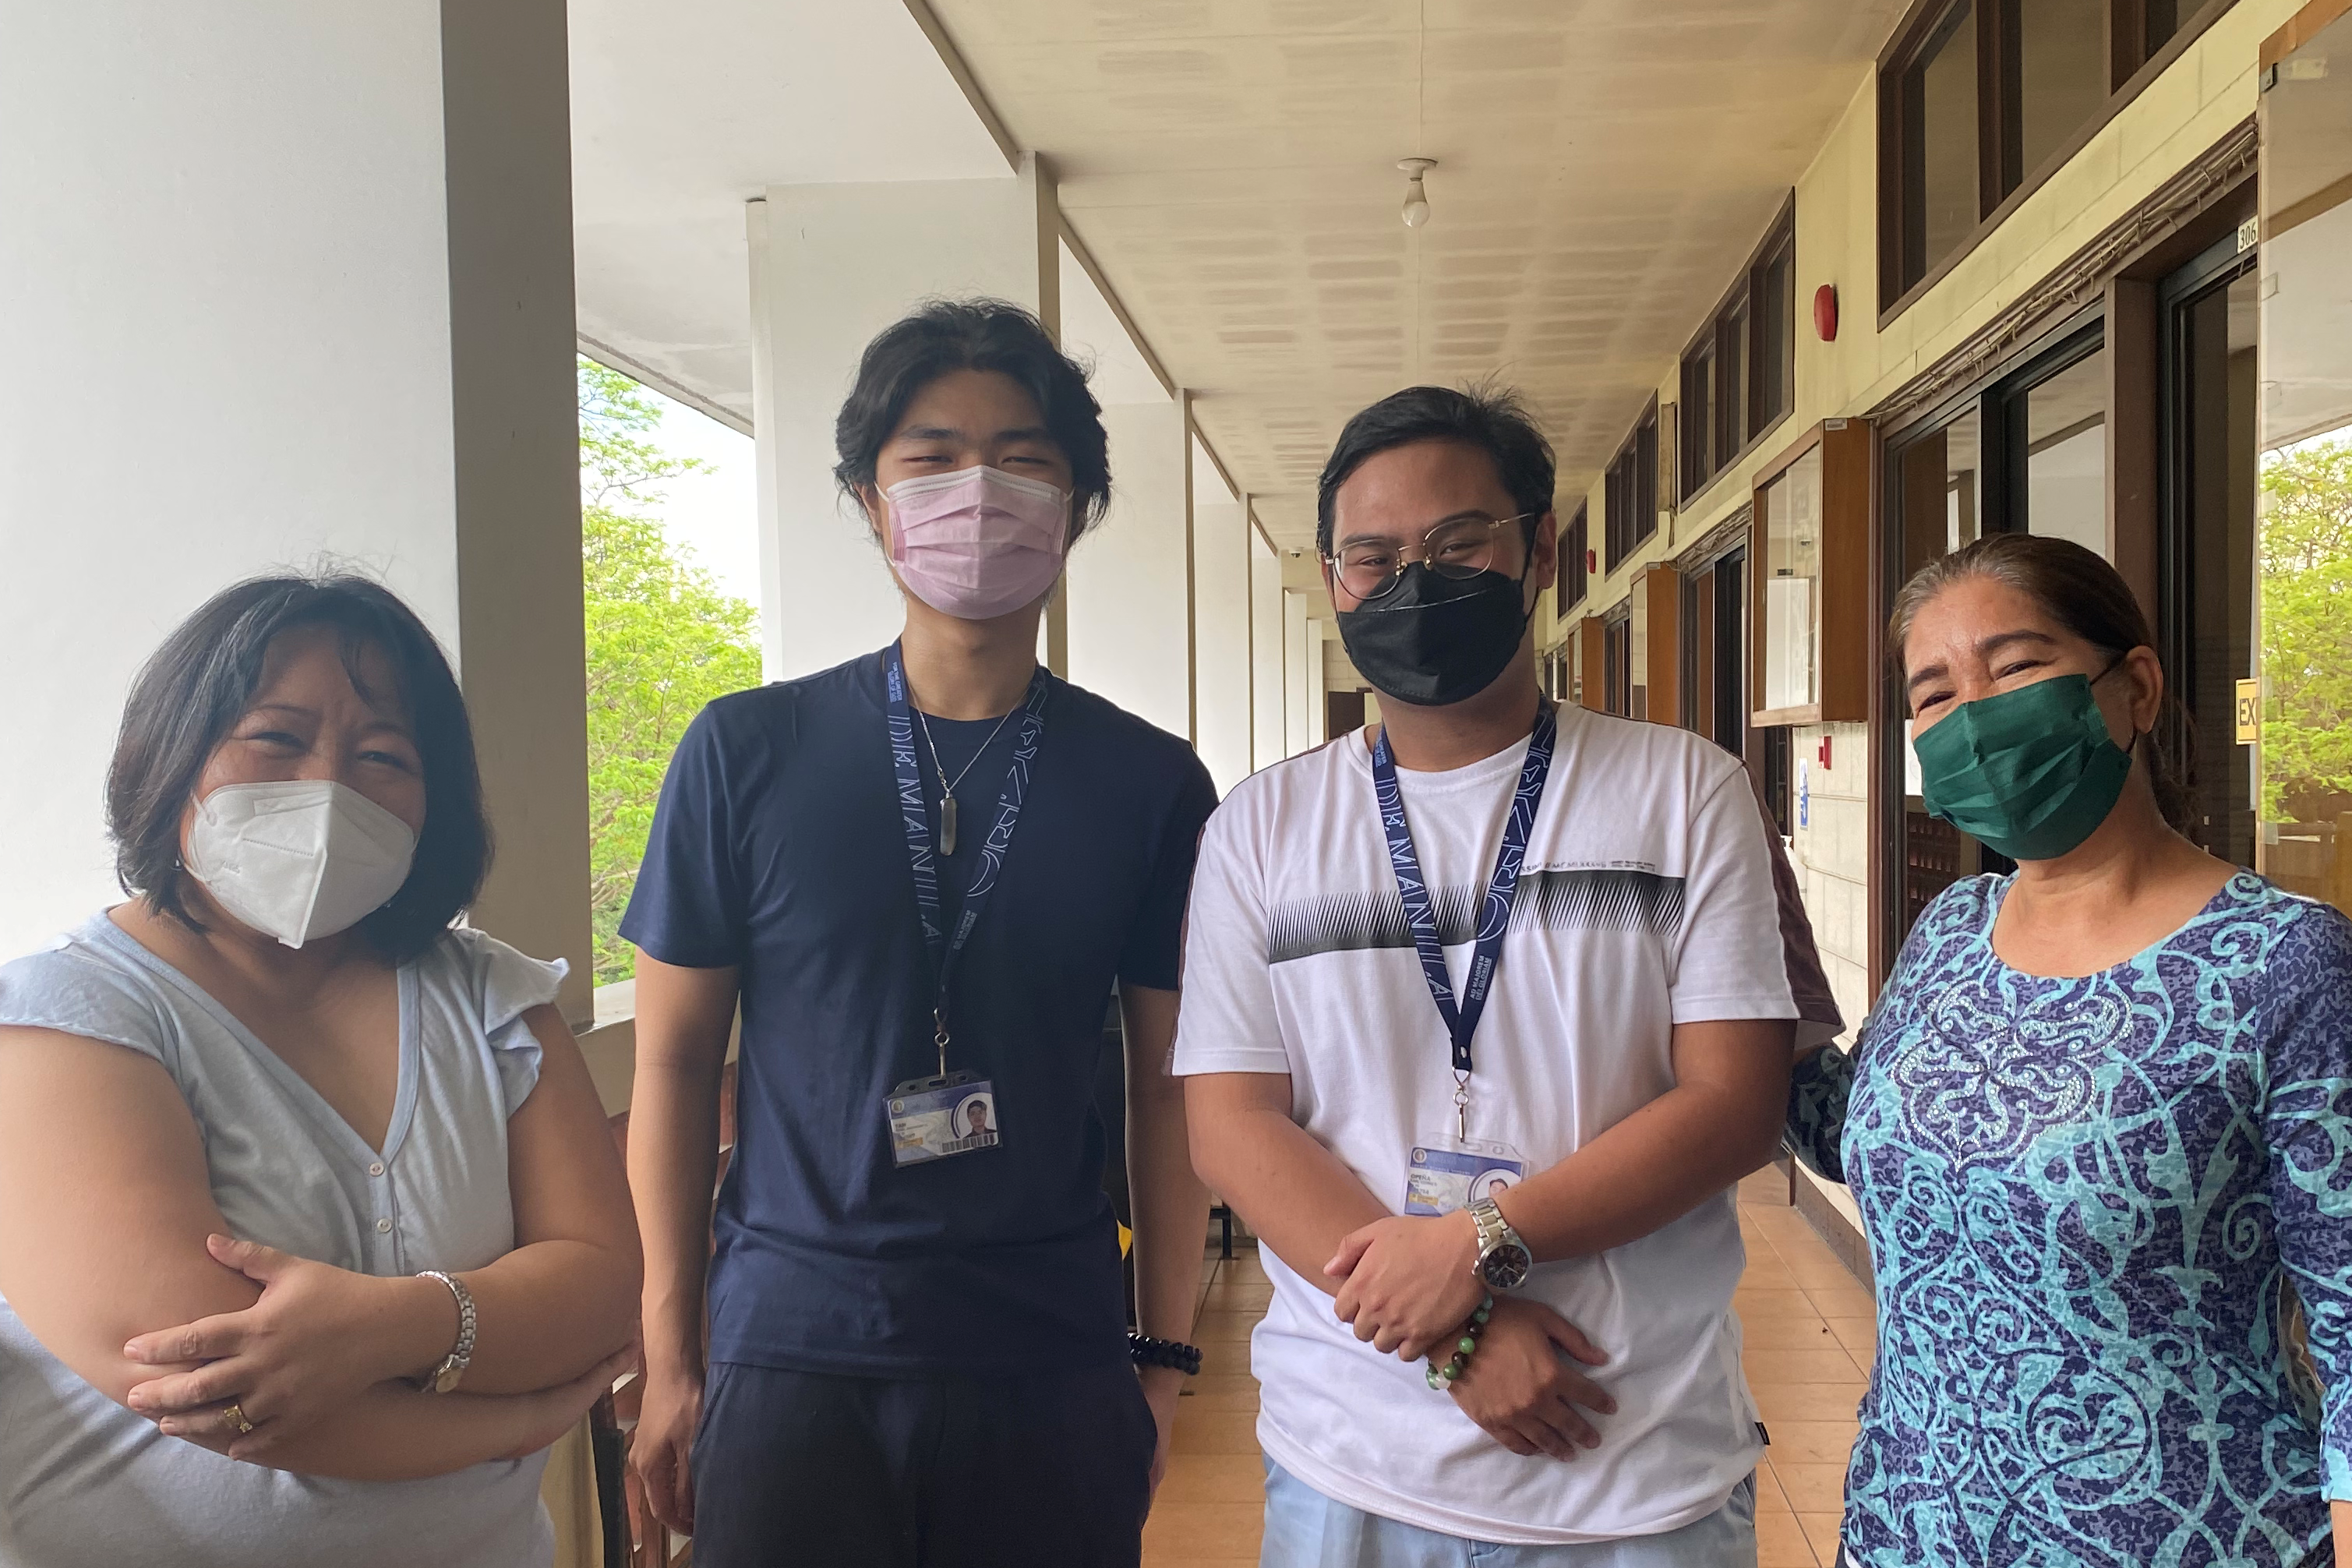 Students welcomed by Dr. Guzman and Ms. Argones. From left to right: Dr. Guzman, Nigel Anthony Tan, Karl Cedric Opeña (2 BS Environmental Science), and Ms. Argones.